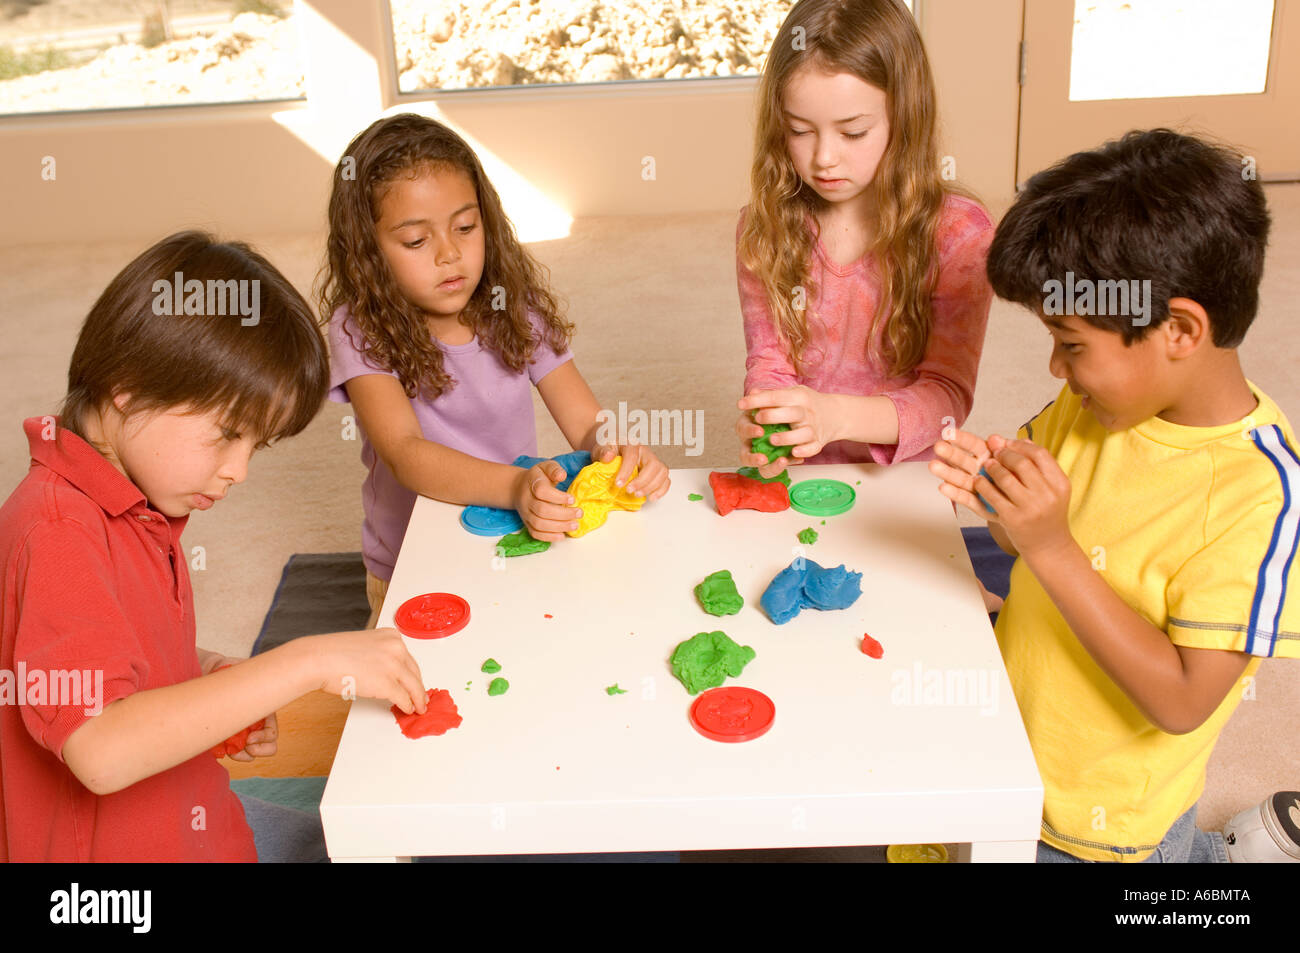 Portrait of children playing with playdough Stock Photo